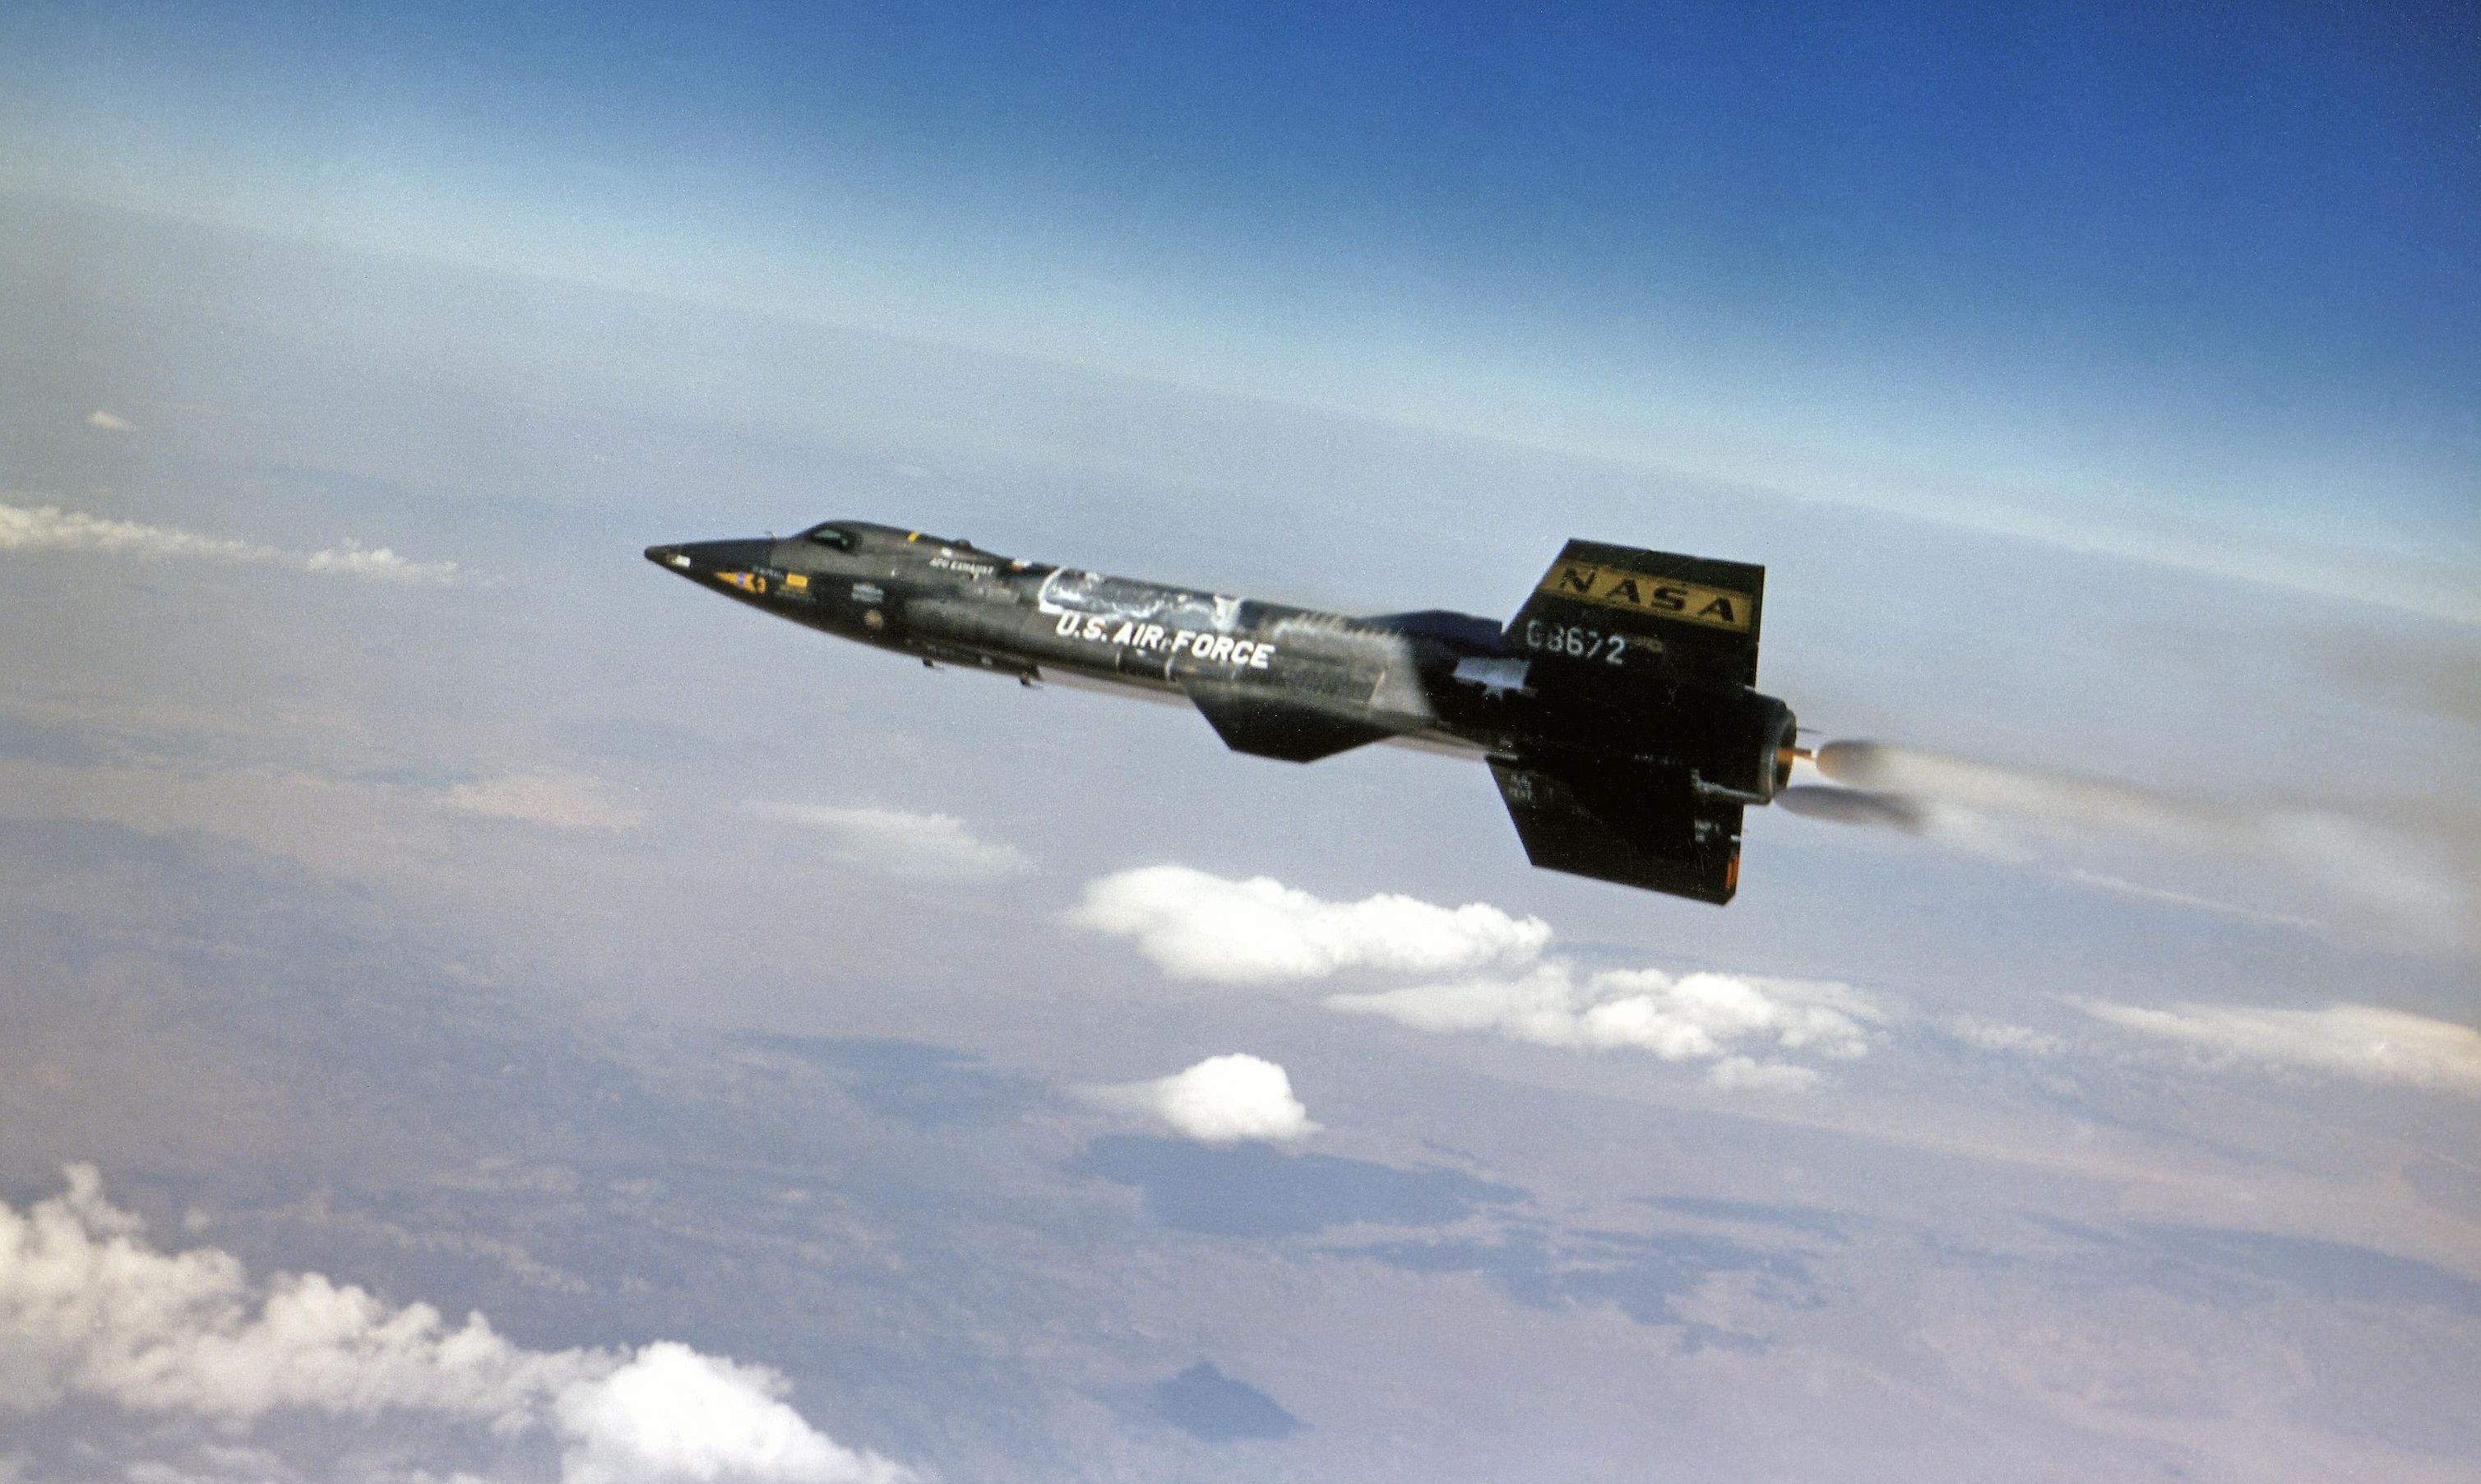 North American Aviation X-15 56-6672 immediately after being dropped by the Boeing NB-52 Stratofortress. (NASA)